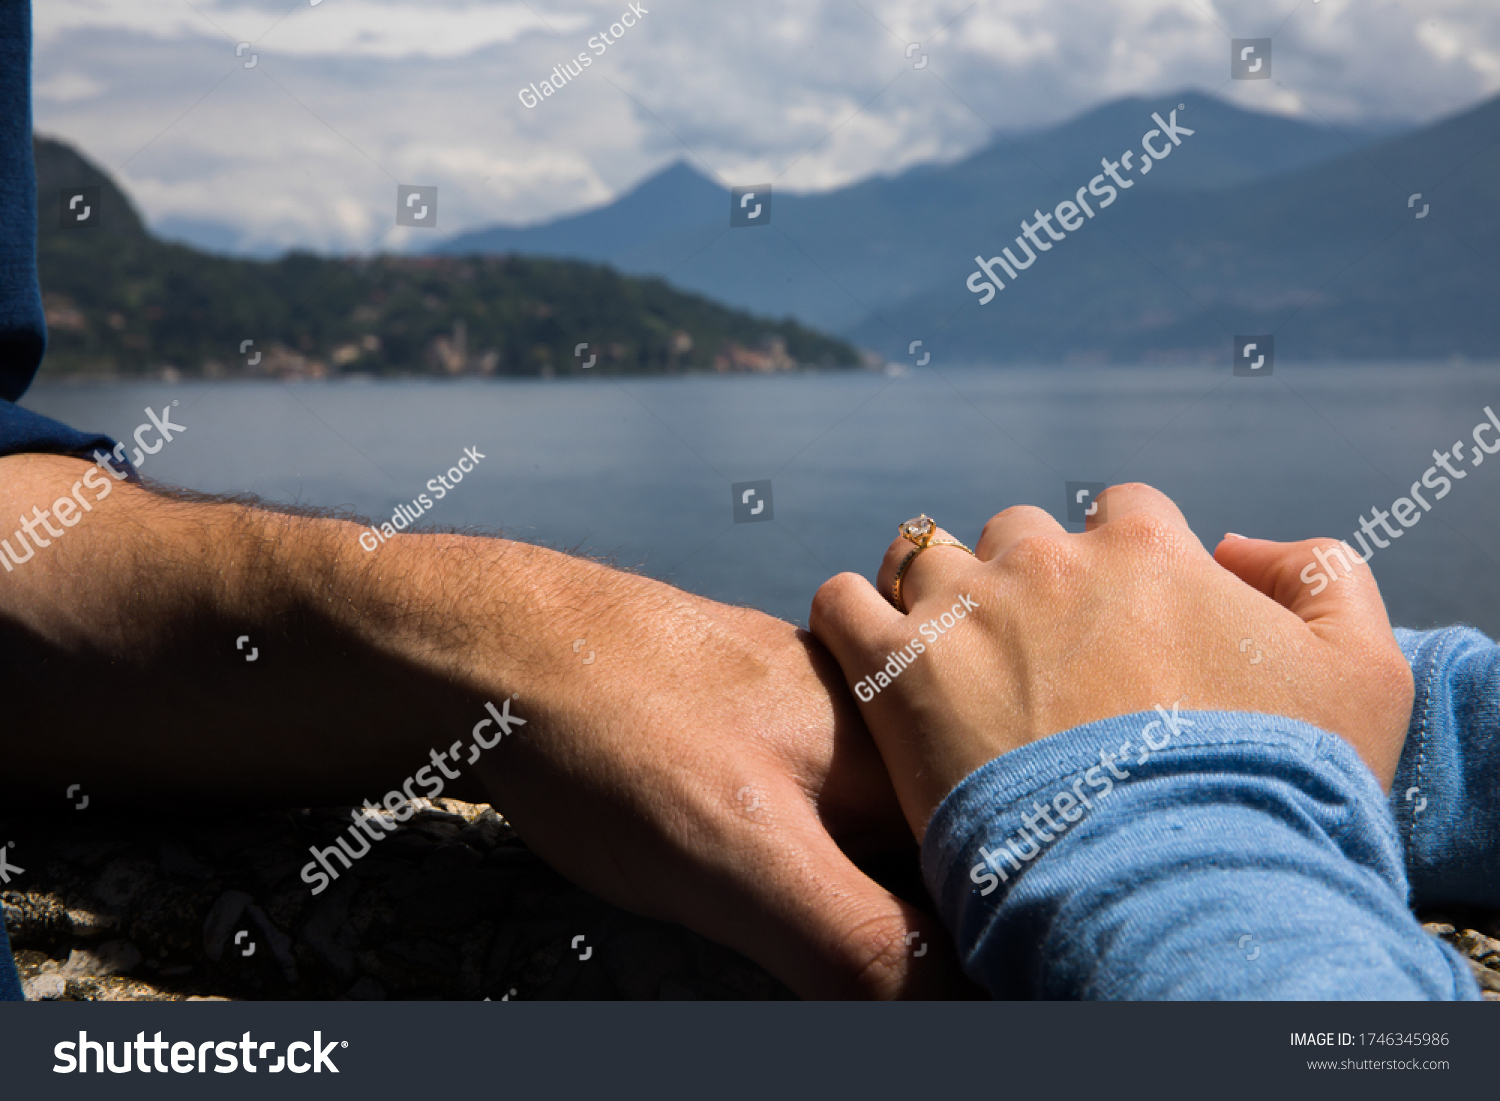 Couple. You can see the hands touching each other. Sensually.Water and mountains in the background. #1746345986